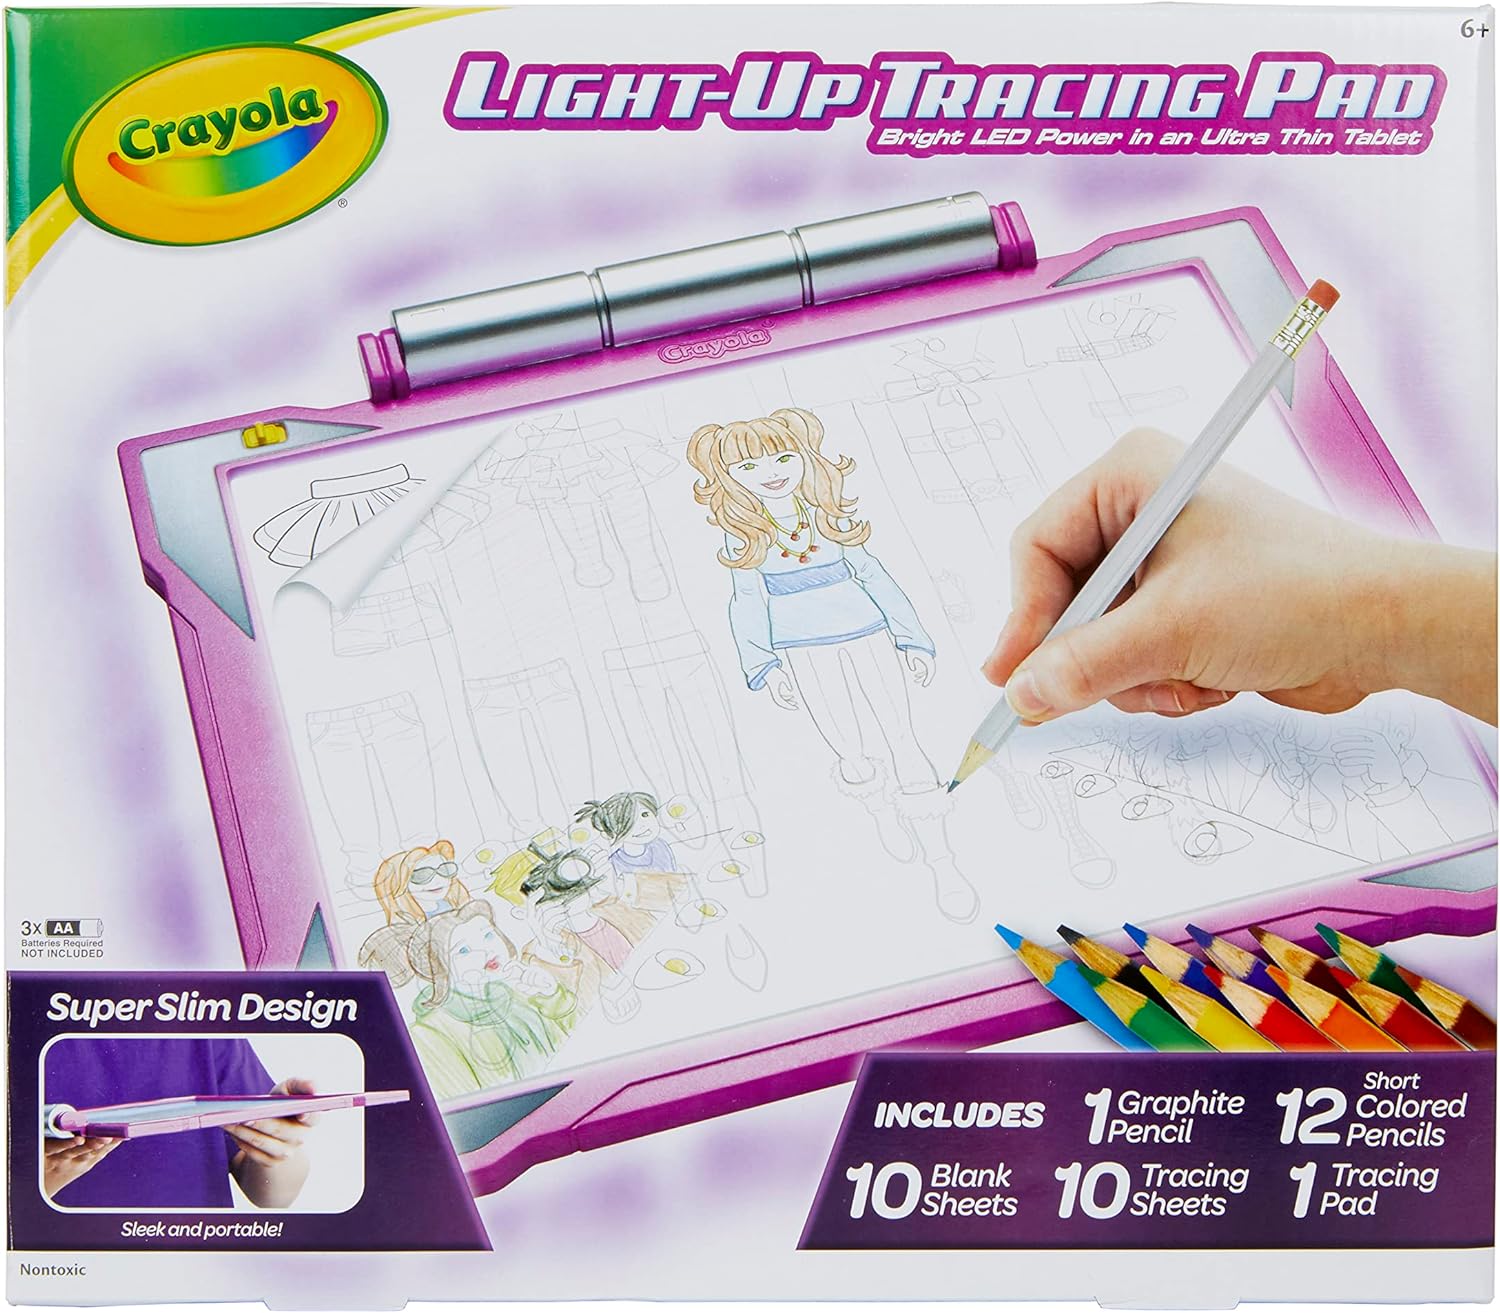 Crayola Light-up Tracing Pad, Pink Tablet, Colouring Board for Kids, Light Box with Bright LEDs, Easy Tracing with Included Tools!